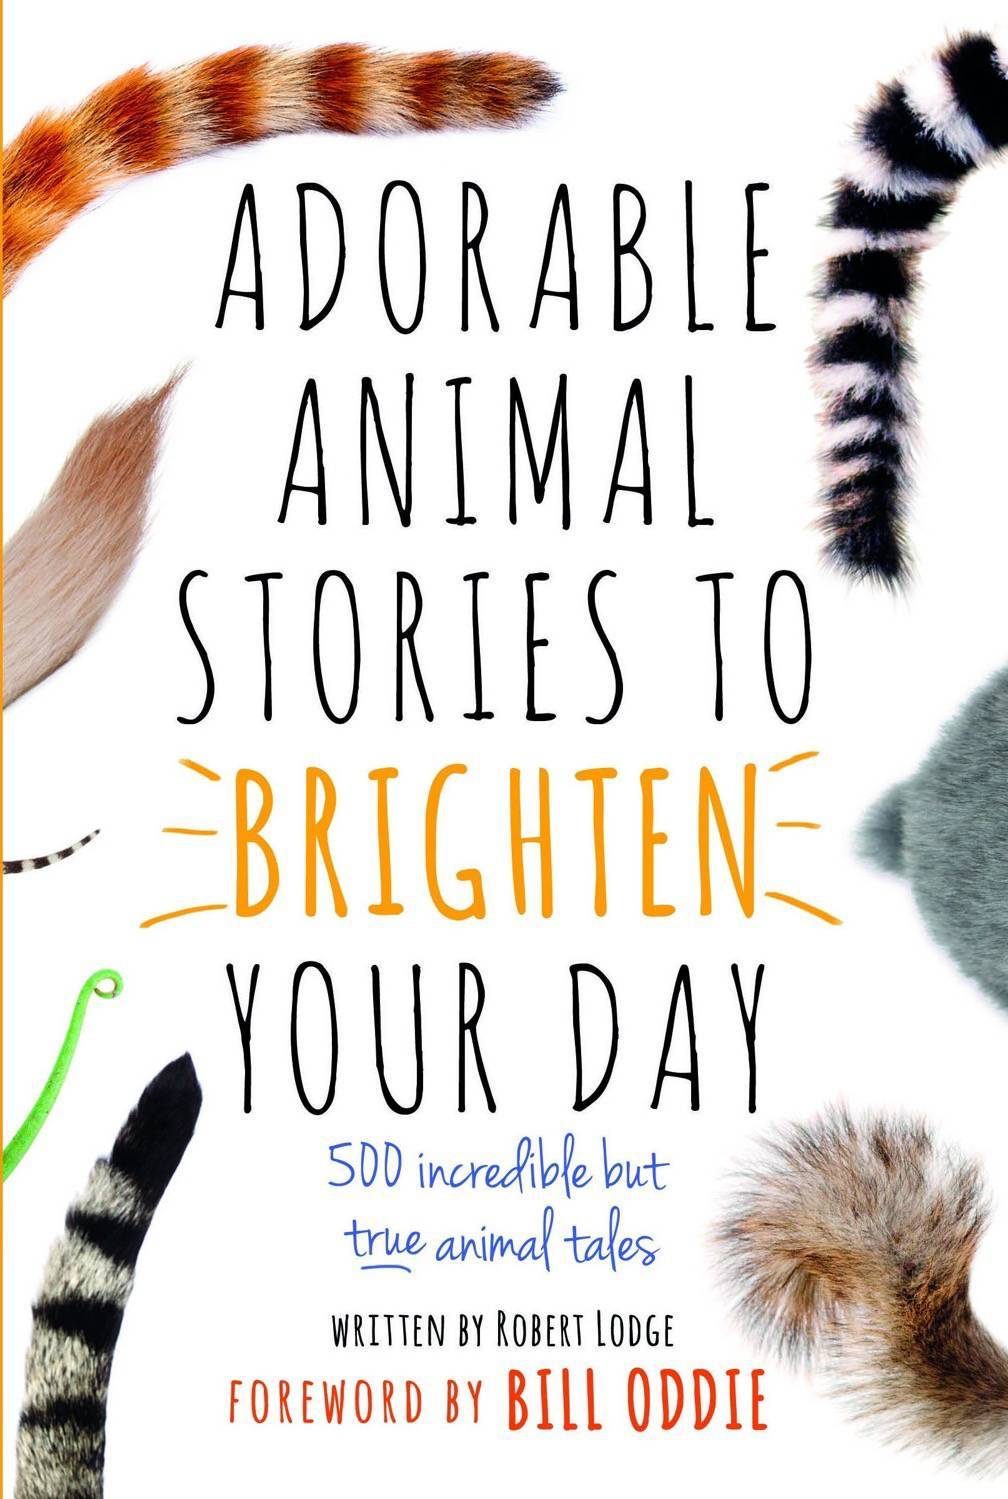 just so stories animals